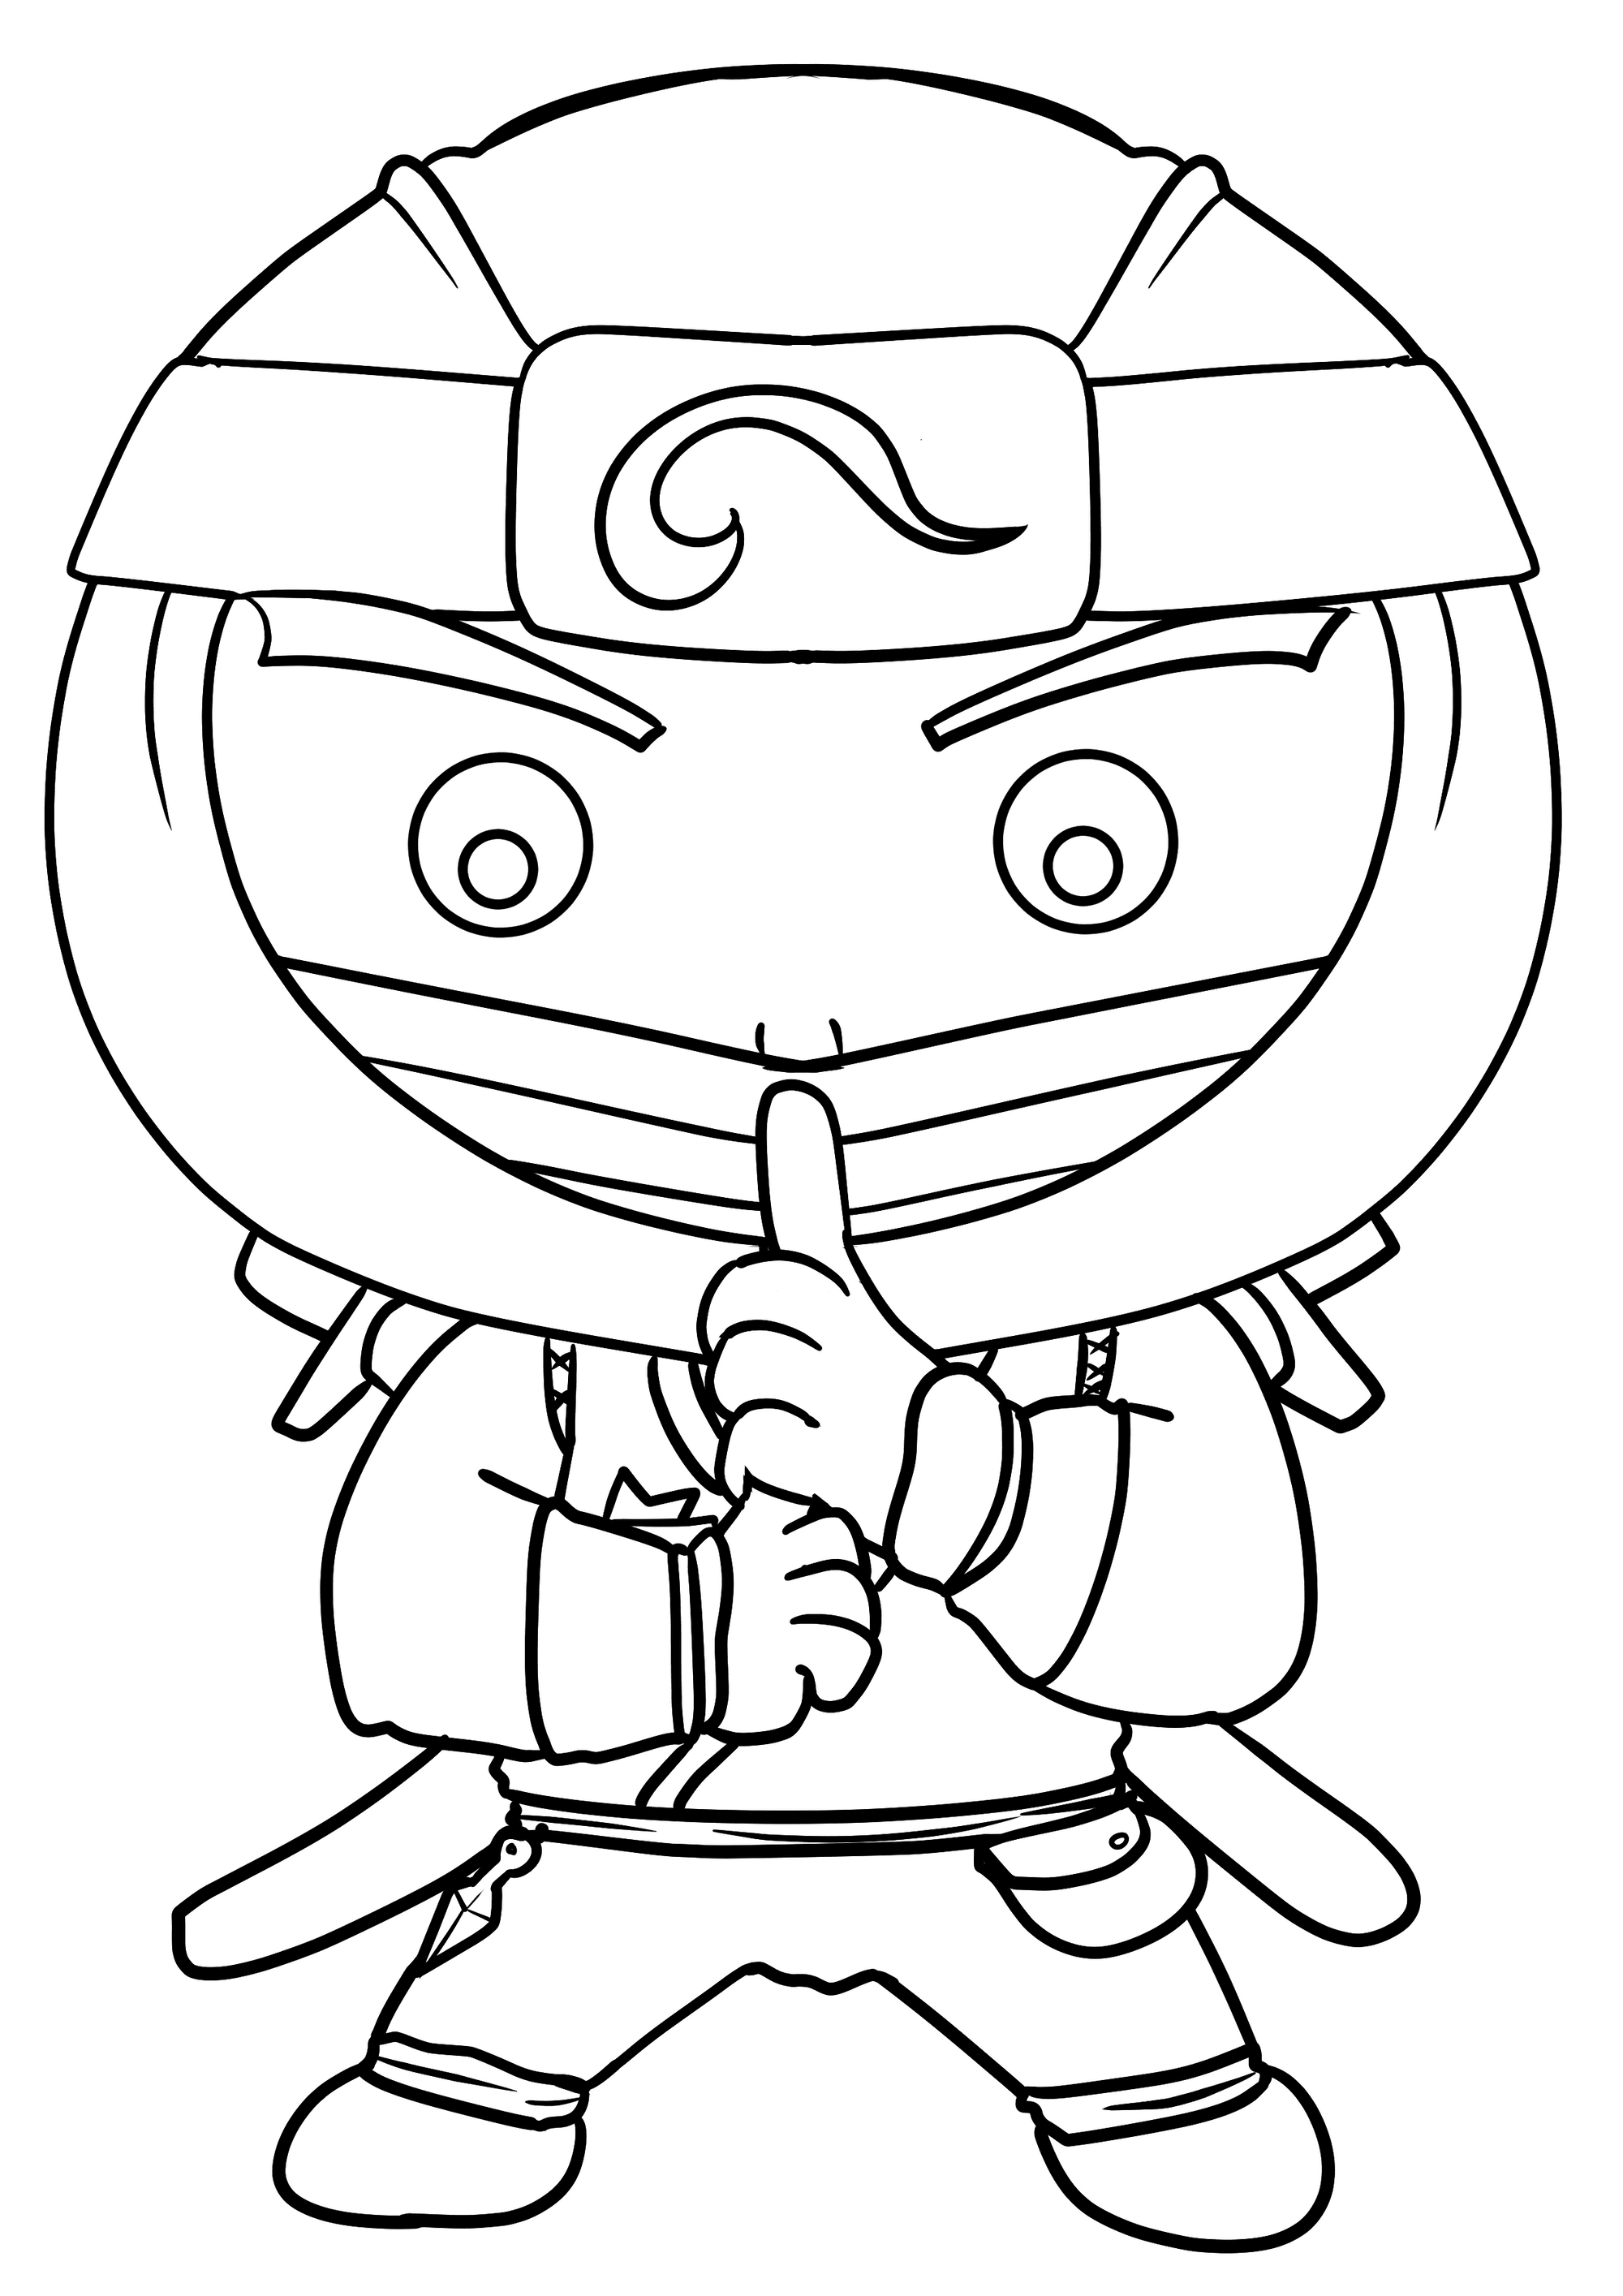 Ninja coloring page for kids NFT - NurieWorld | OpenSea